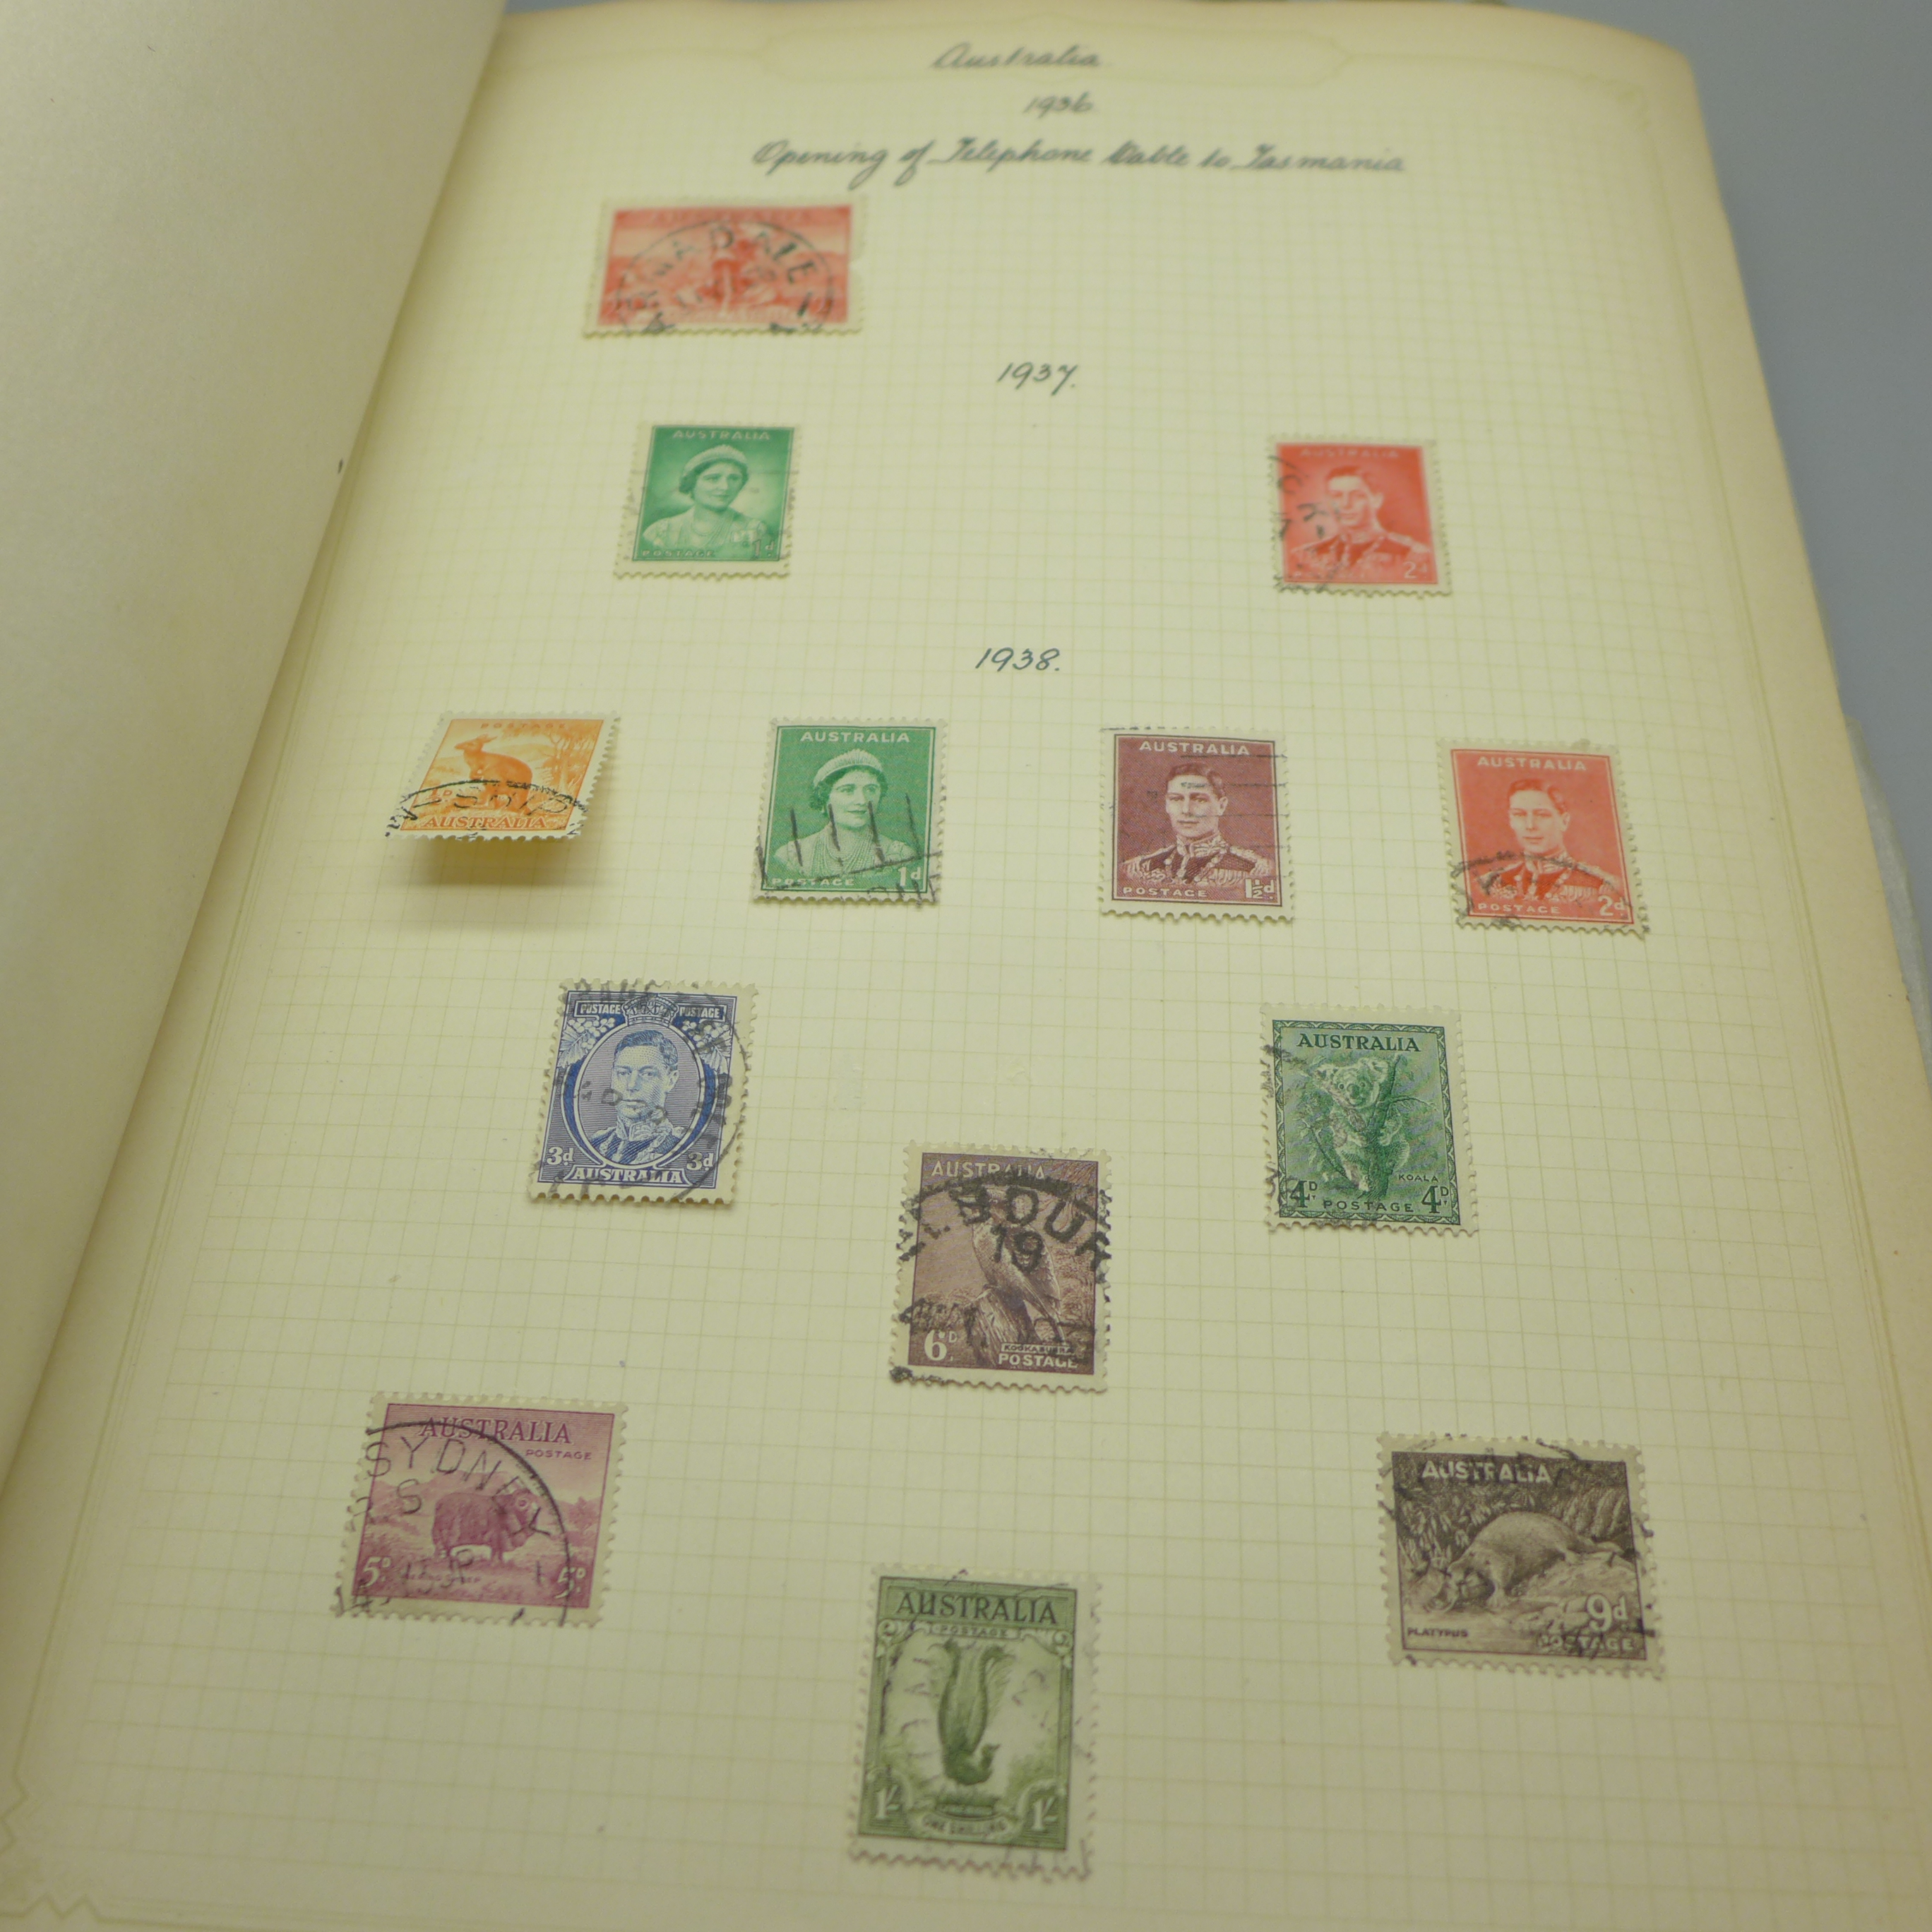 Stamps; an album of GB postage stamps, including Penny Black, a Two Pence Blue, Penny Reds, ( - Image 41 of 42